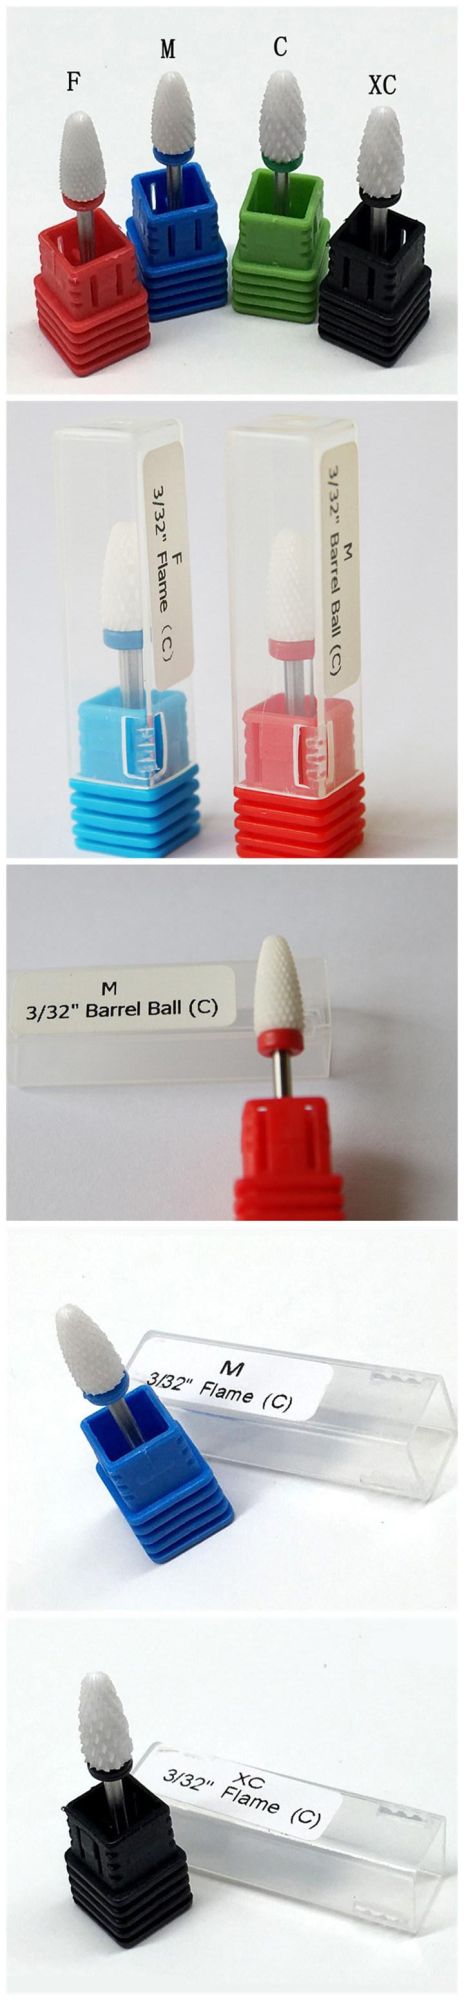 Different Color Carbide Ceramic Metal Grinding Nail Drill Bits